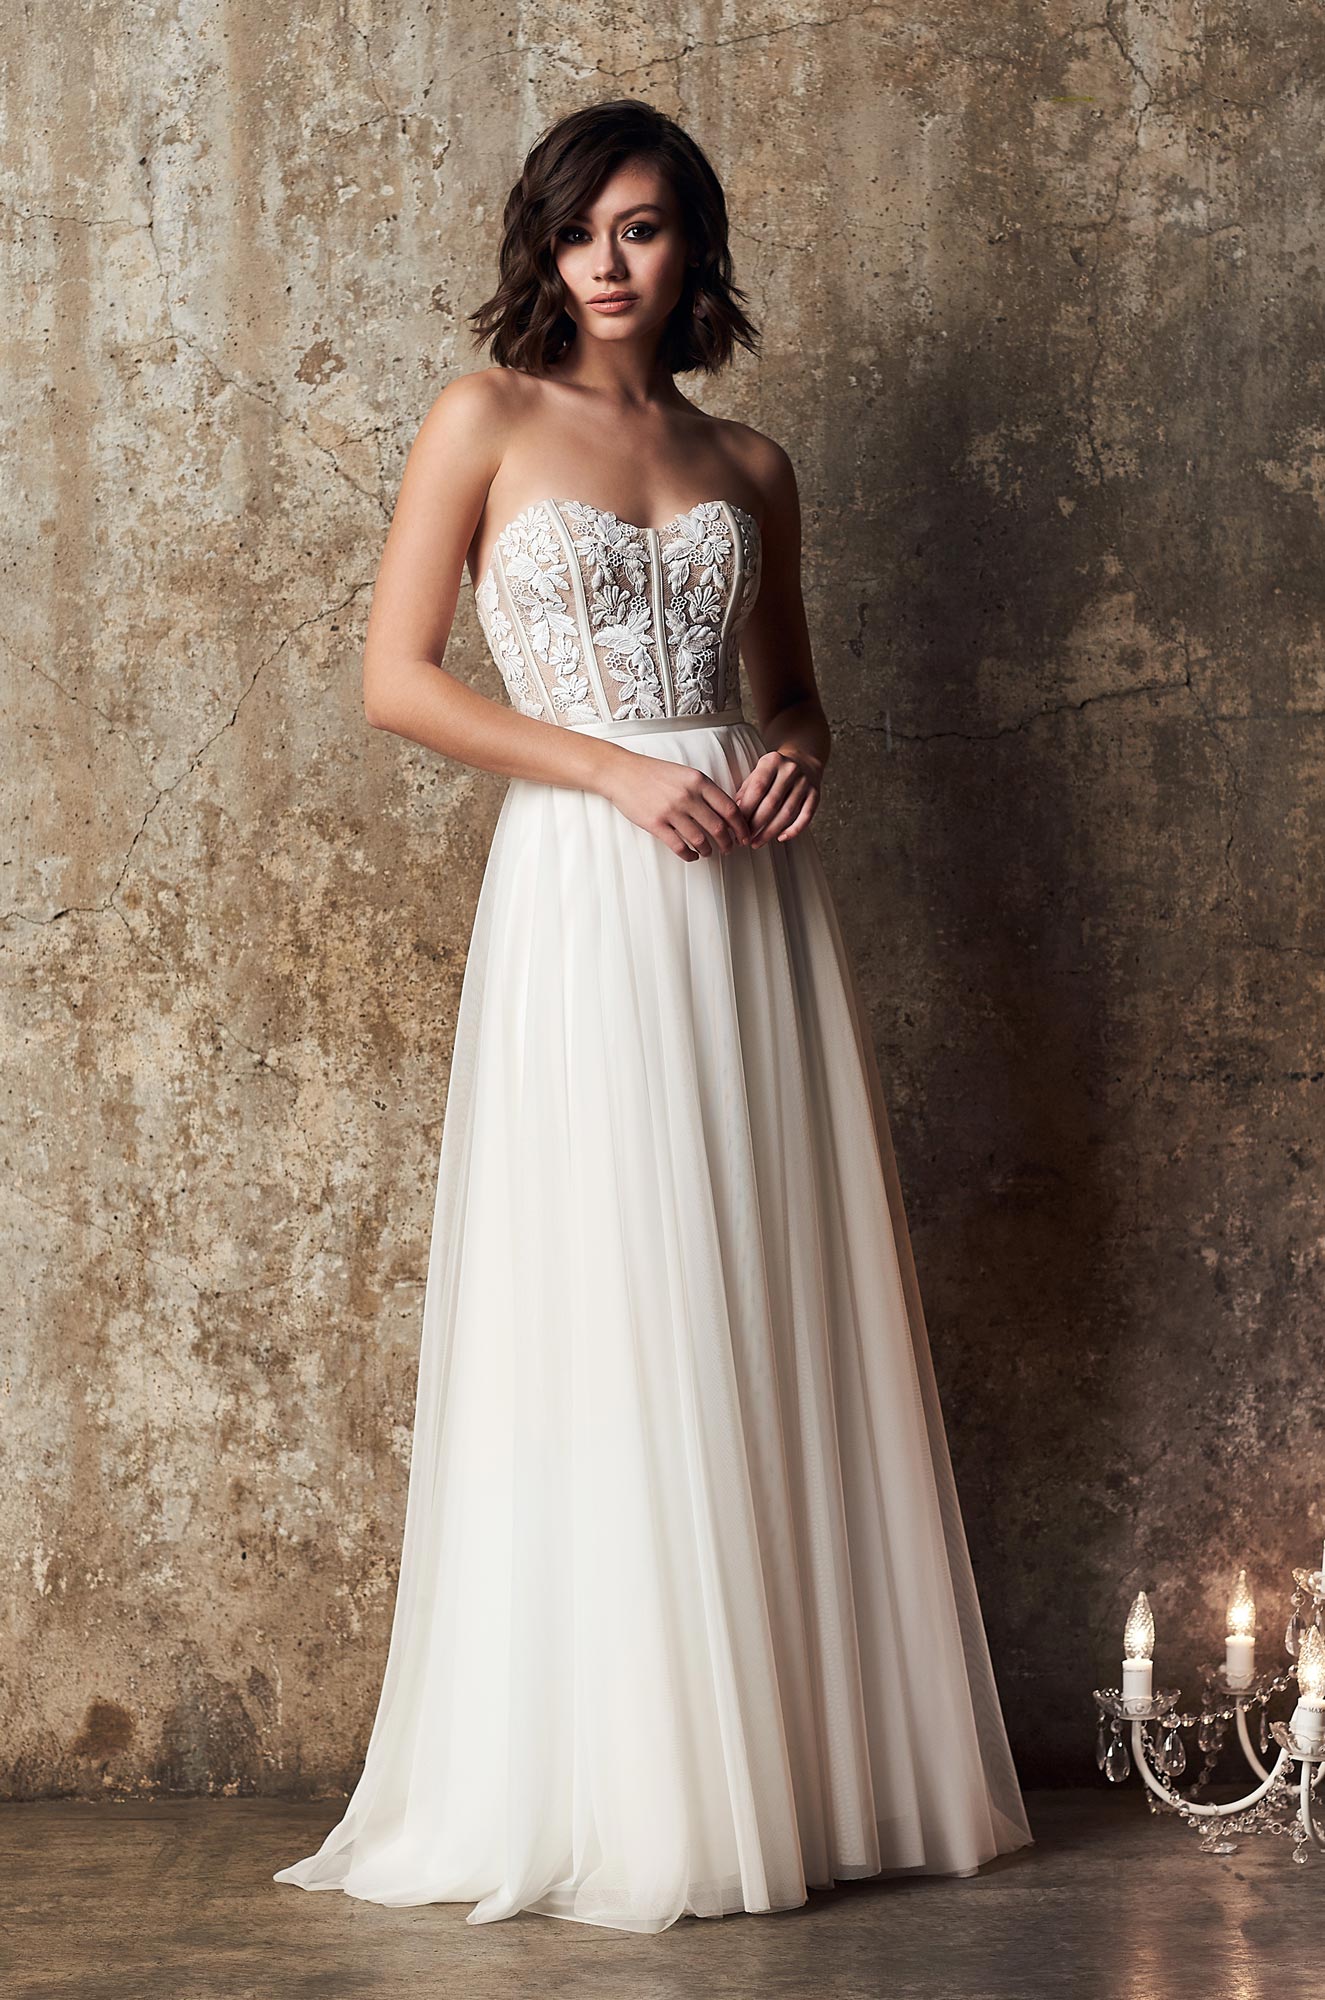 How to Choose the Right Wedding Dress Silhouette - Vows Bridal